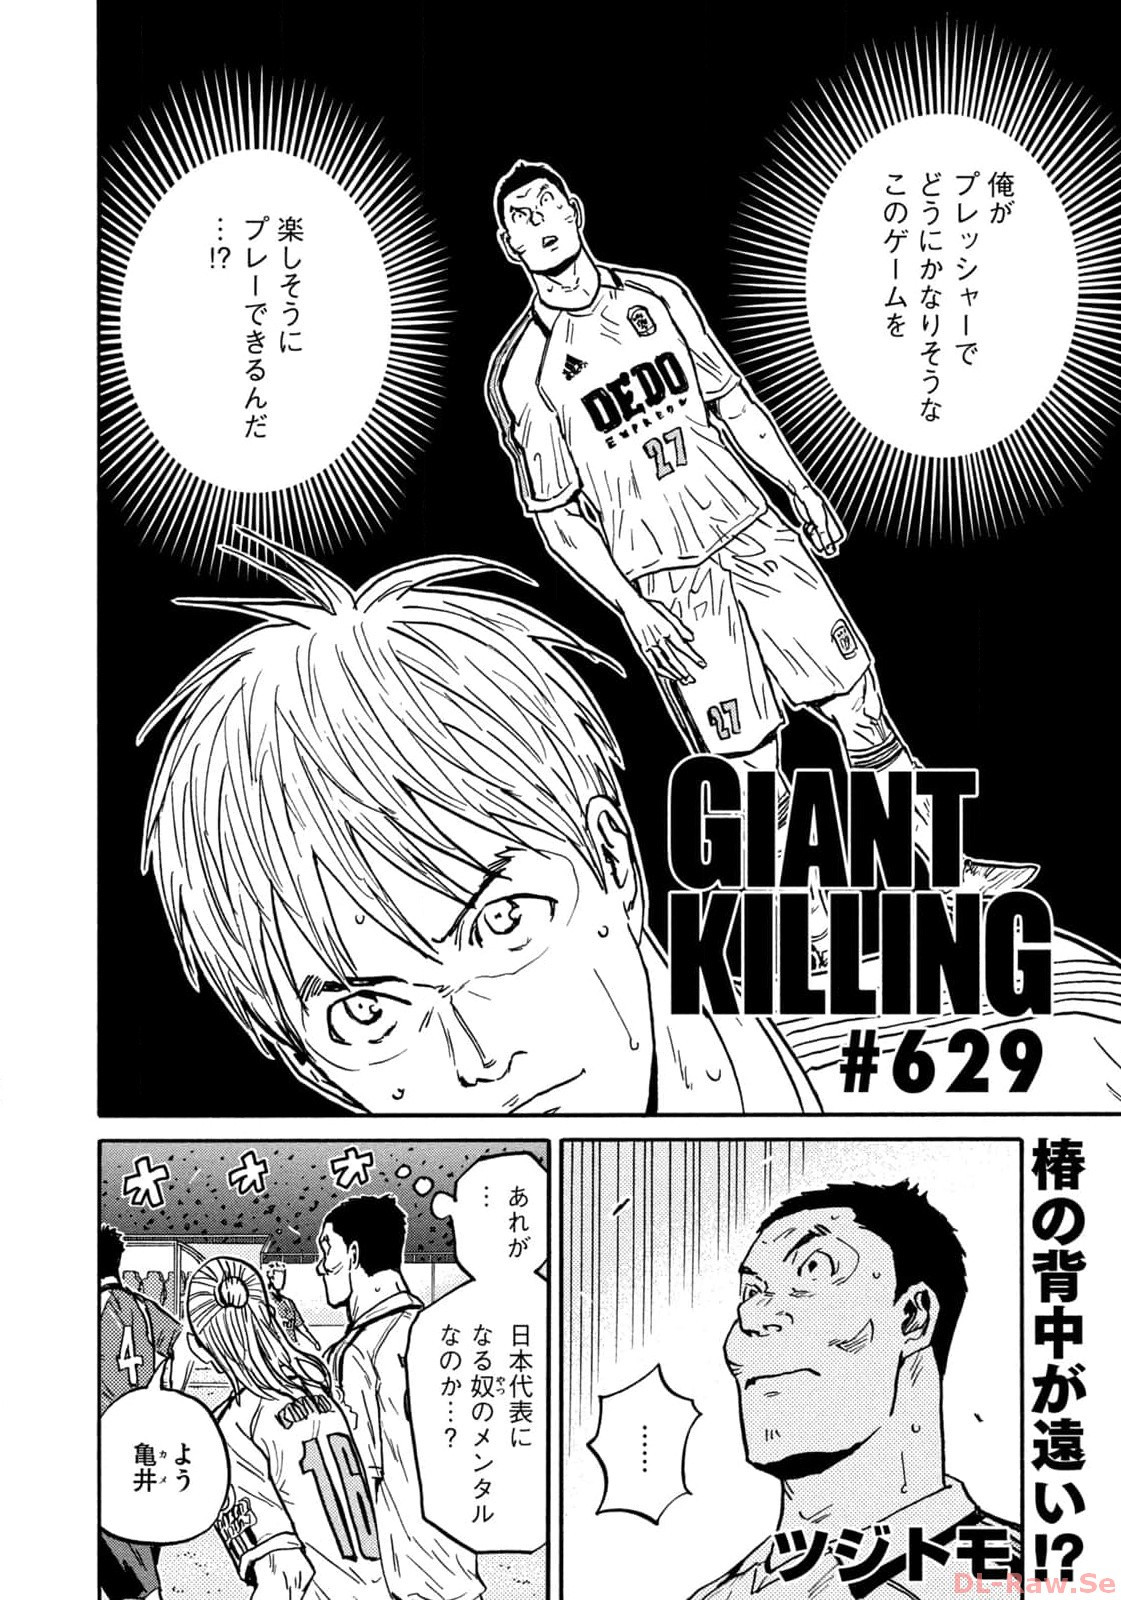 Giant Killing - Chapter 629 - Page 2